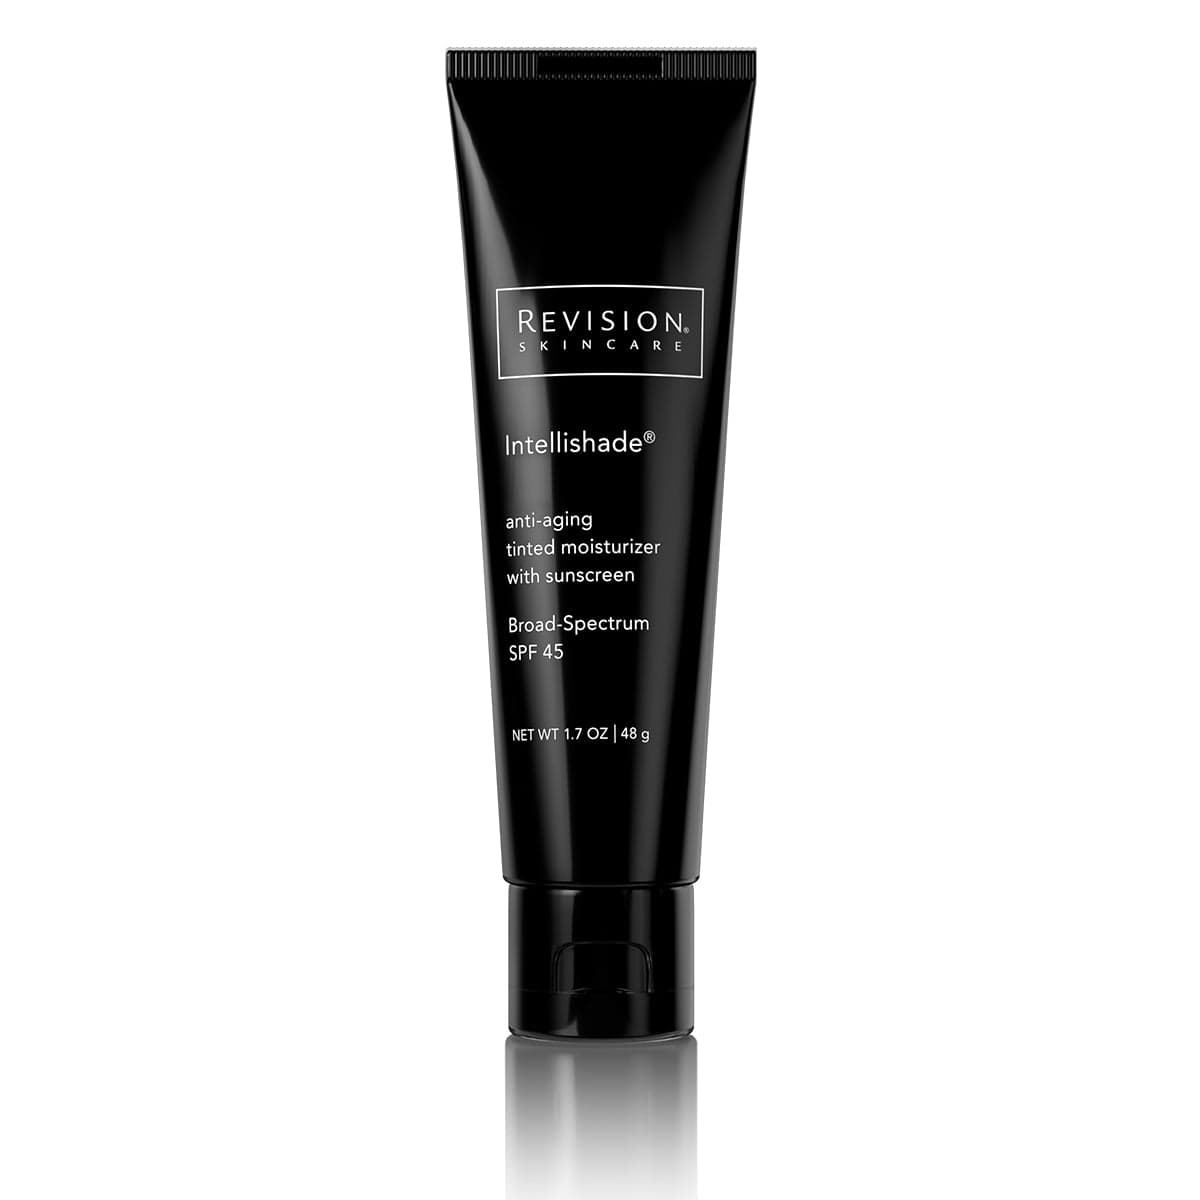 Injection Perfection Full Size Regimen Collection- Intellishade